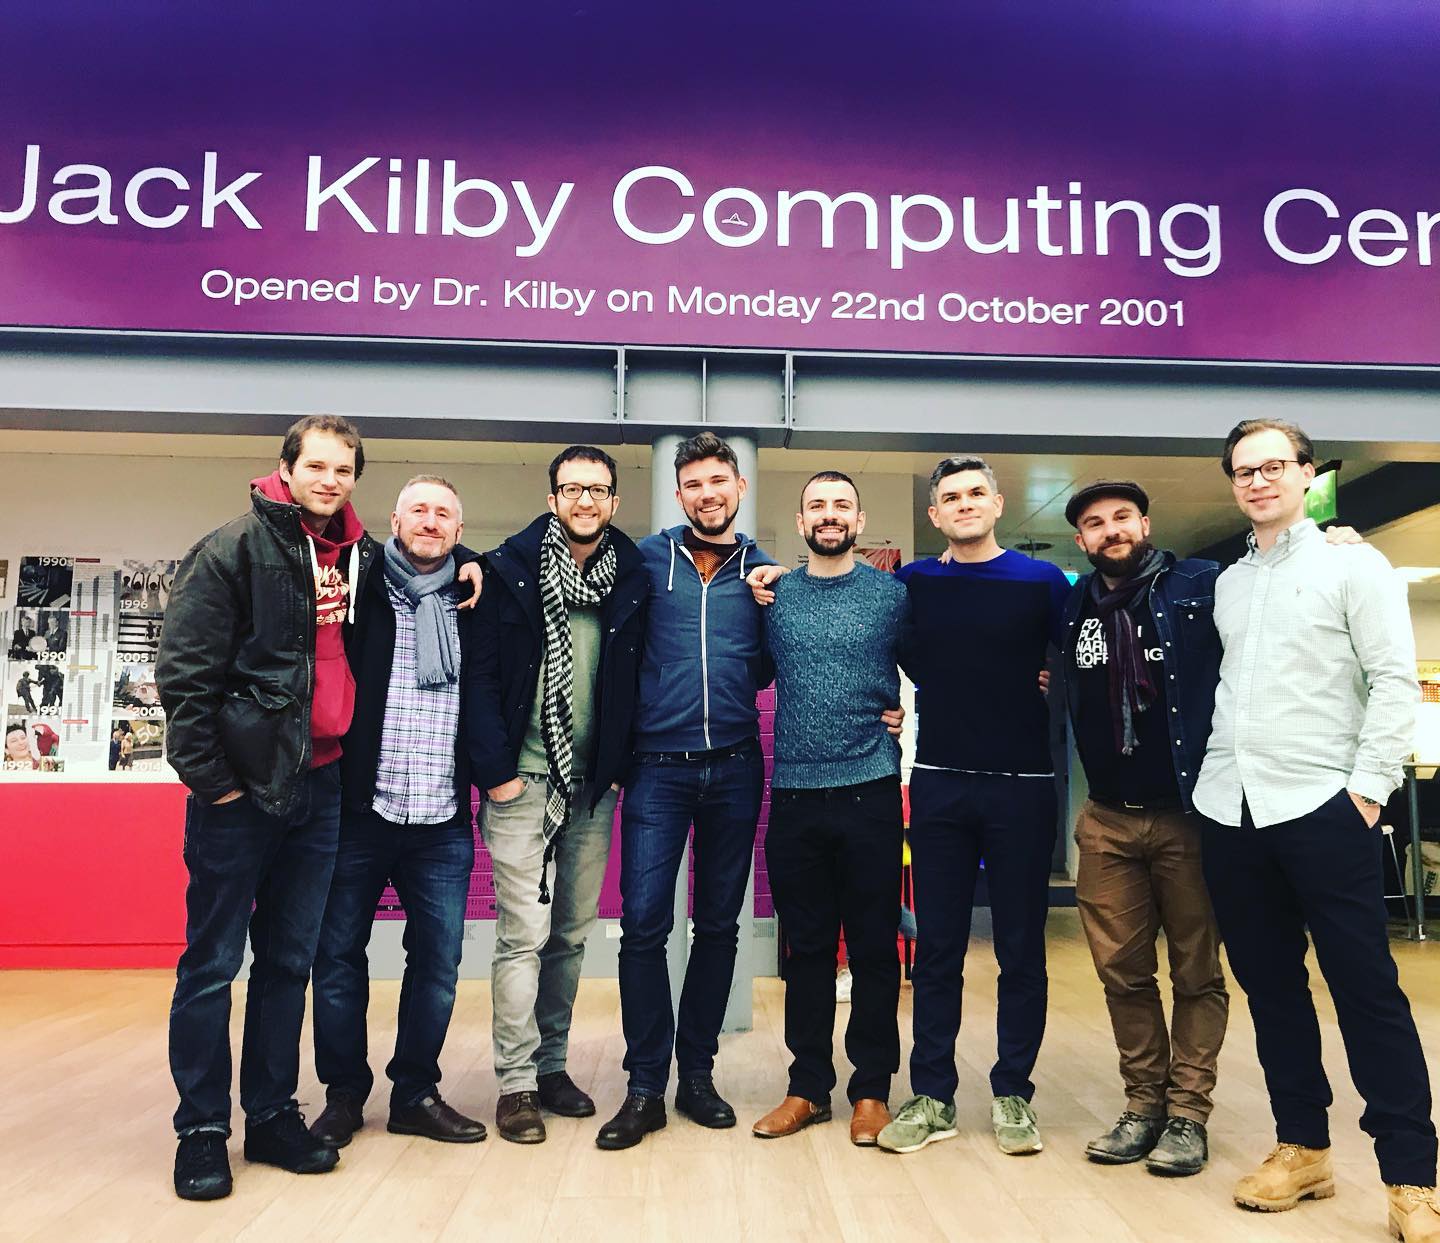 Whisky Society reunion in front of the Jack Kilby Computing Centre sign